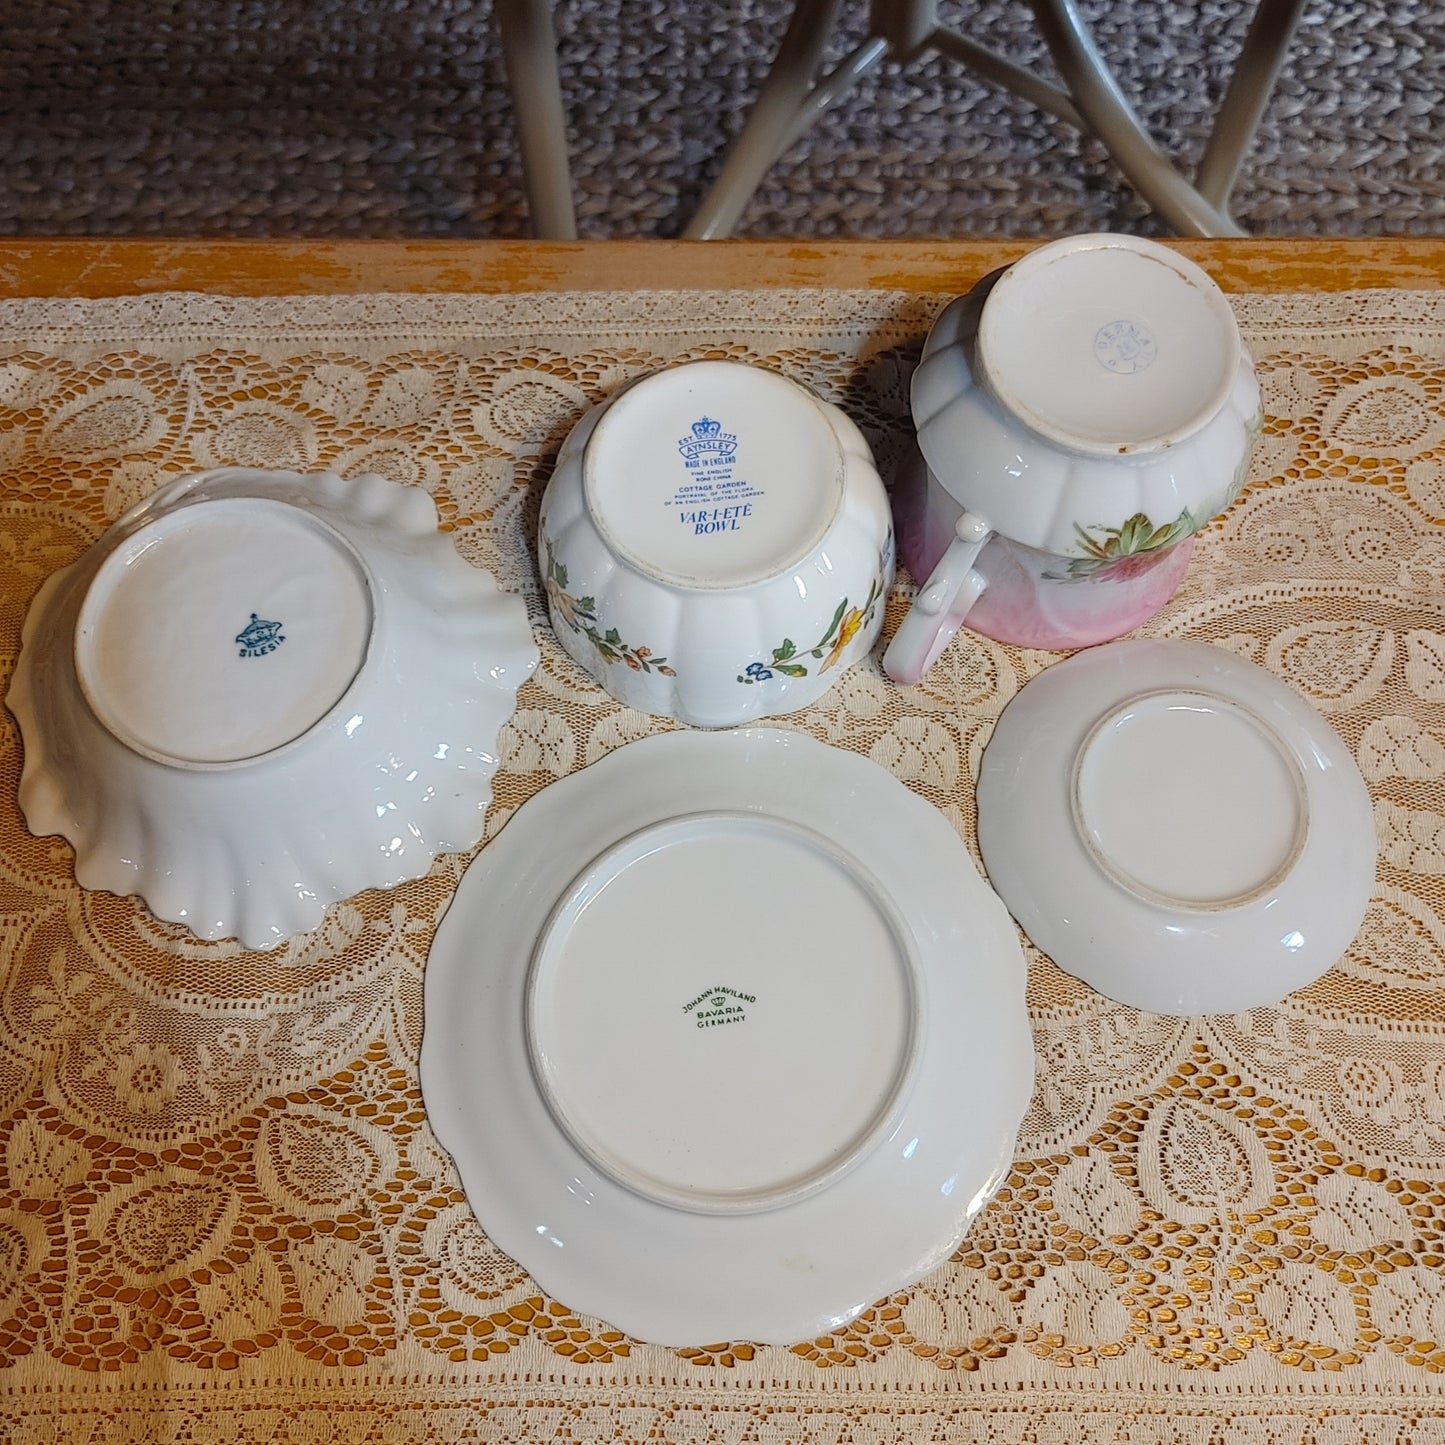 China Combo! Five (5) Pieces Assorted Porcelain Plates Bowl Cup Lot Free Shipping!